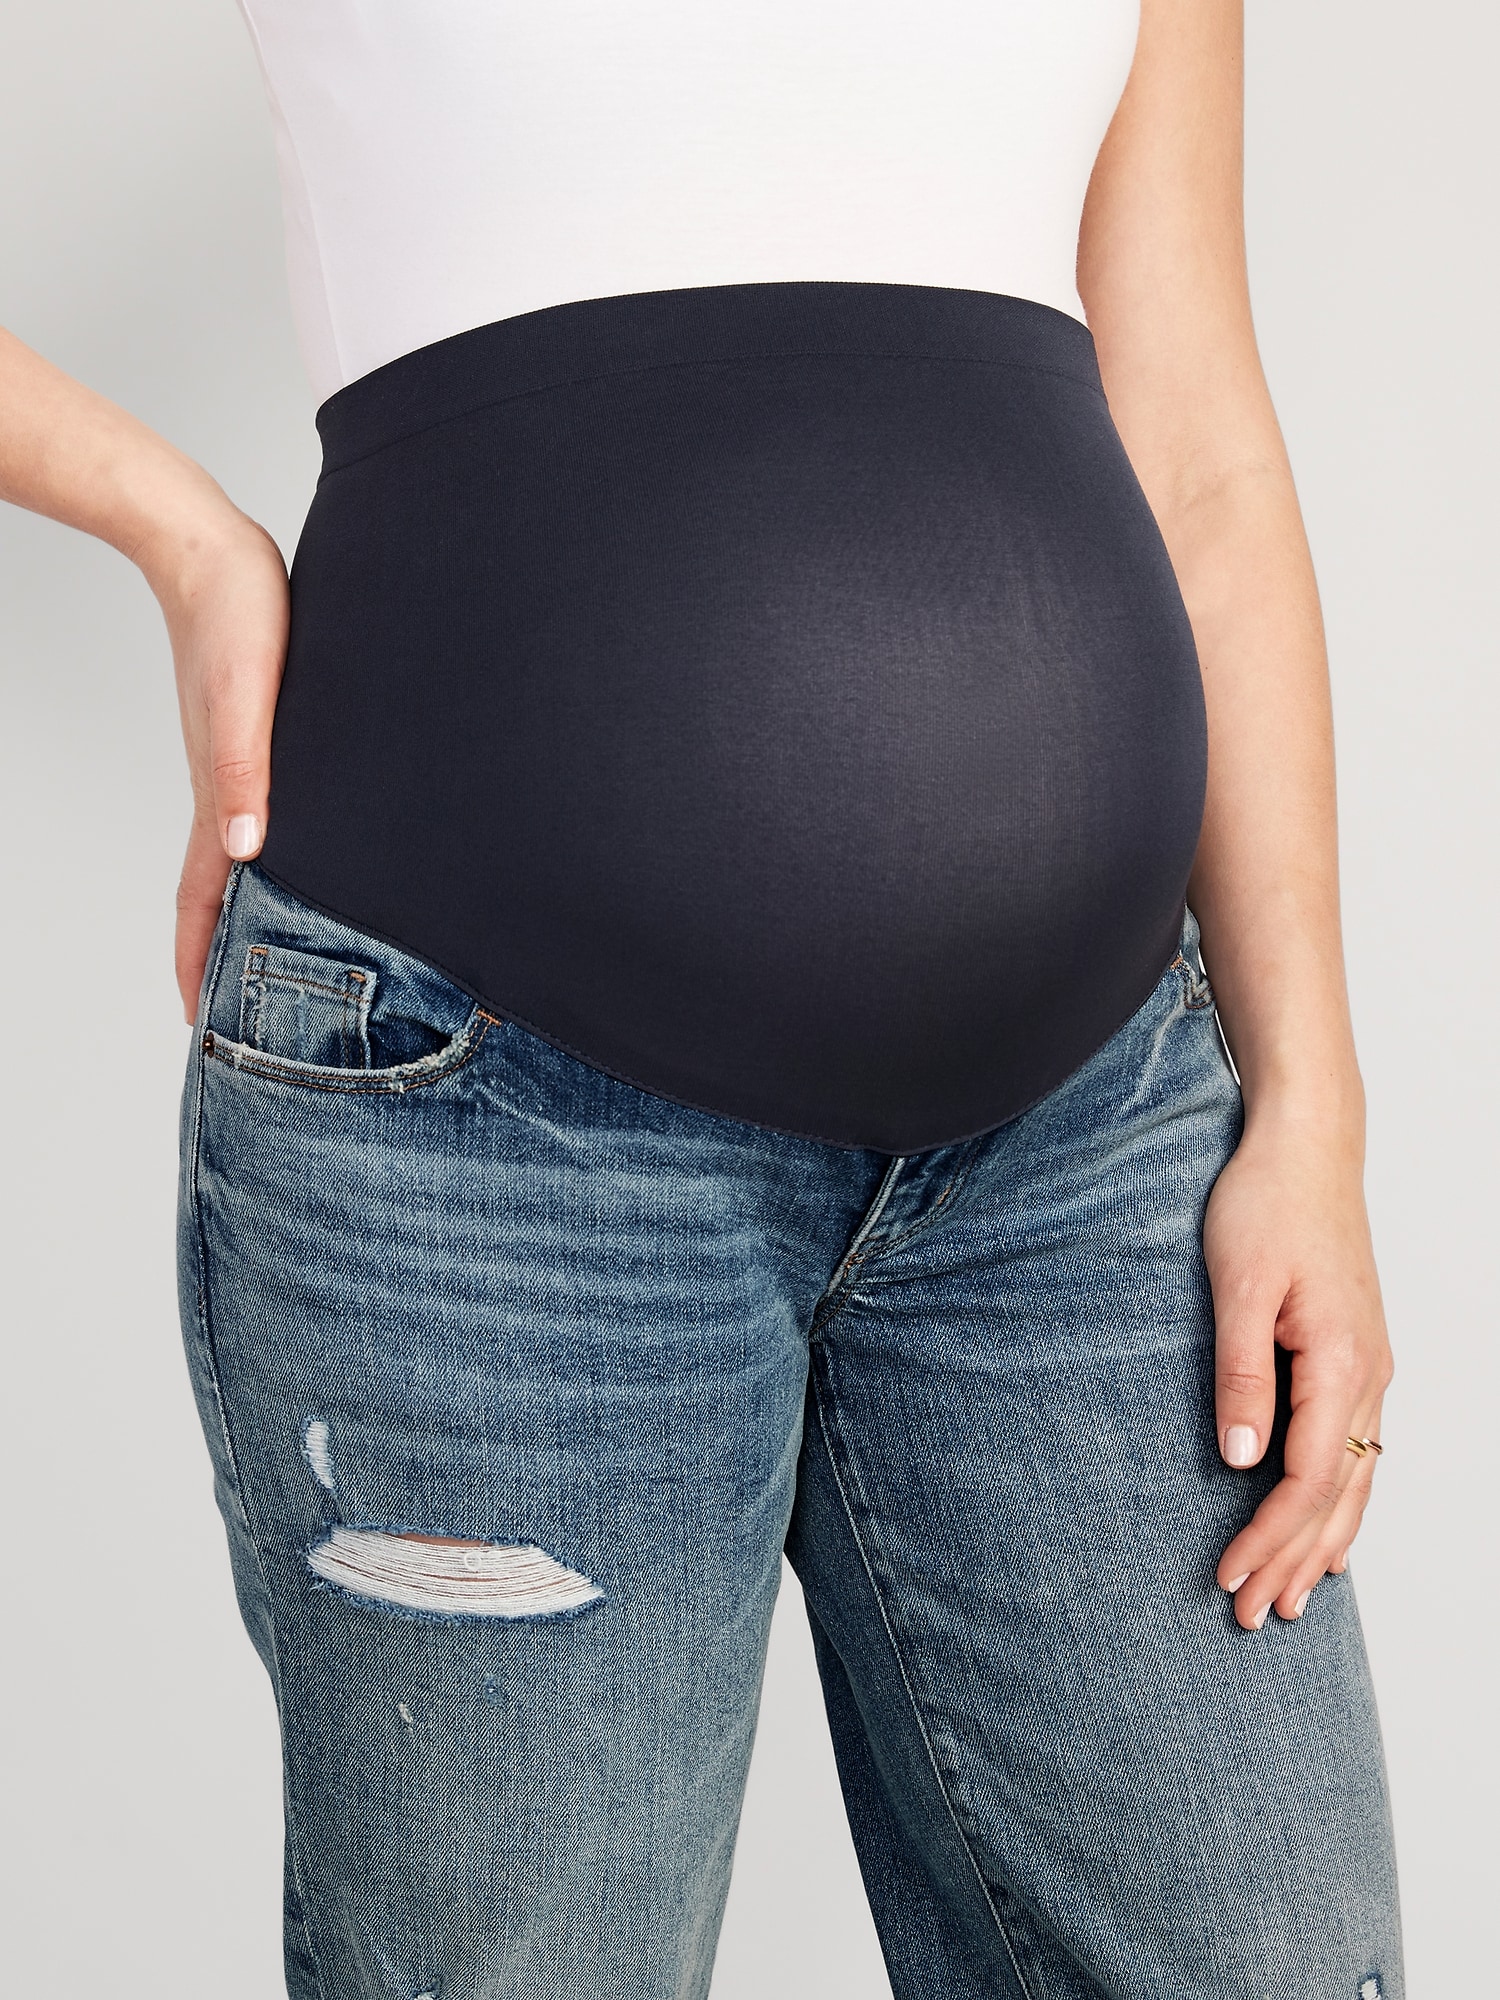 Women's Maternity Skinny Jeans Comfy Stretch High Waist Over The Belly Denim  Pregnancy Pants Frayed Ripped Destroyed at  Women's Clothing store